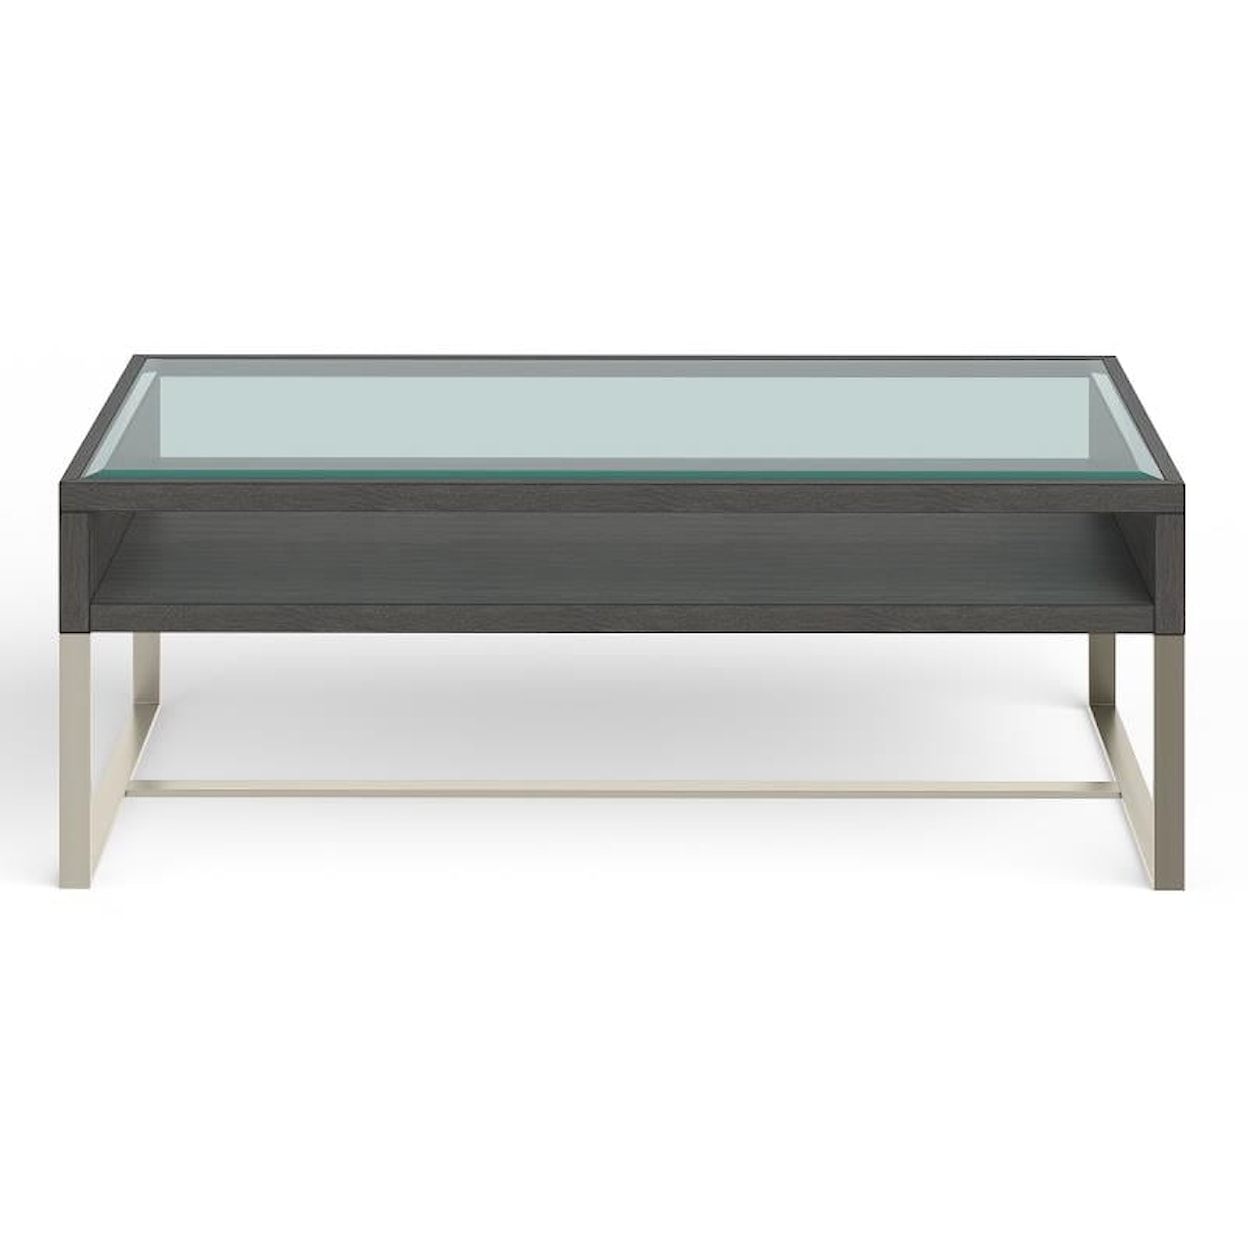 Magnussen Home Langston Occasional Tables Rectangular Cocktail Table